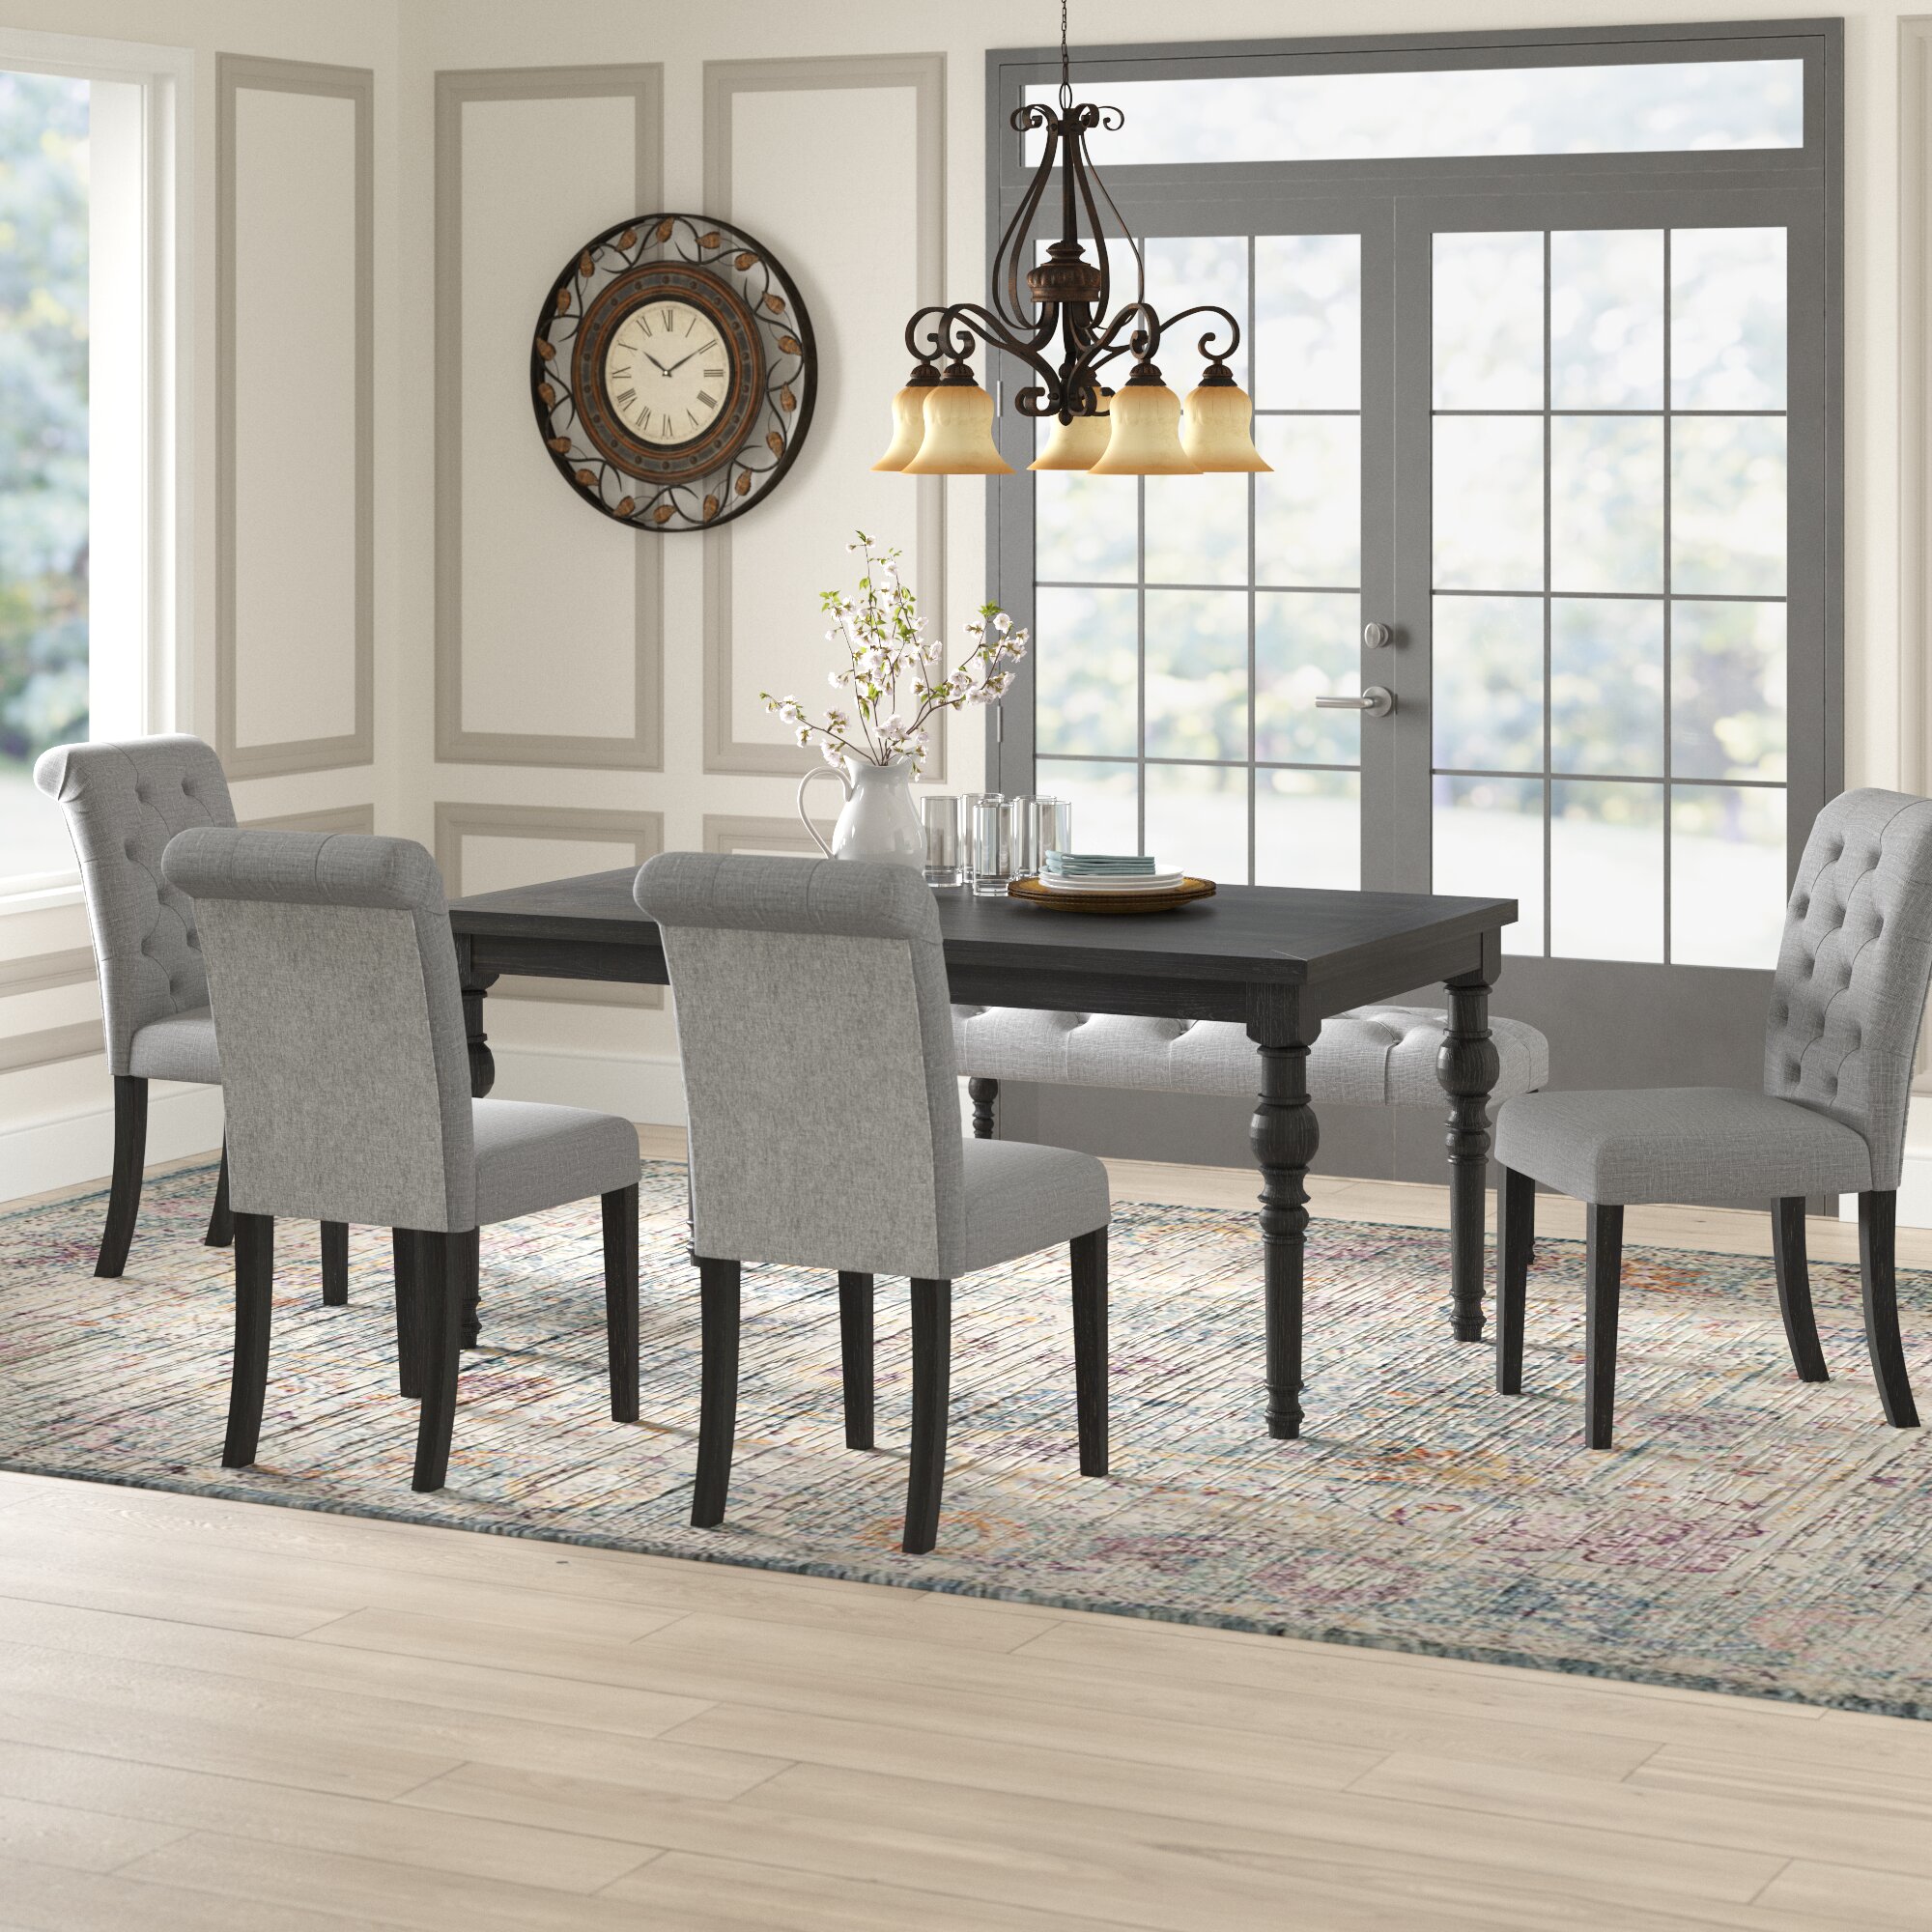 Kitchen Dining Room Sets FREE Shipping Over 35 Wayfair